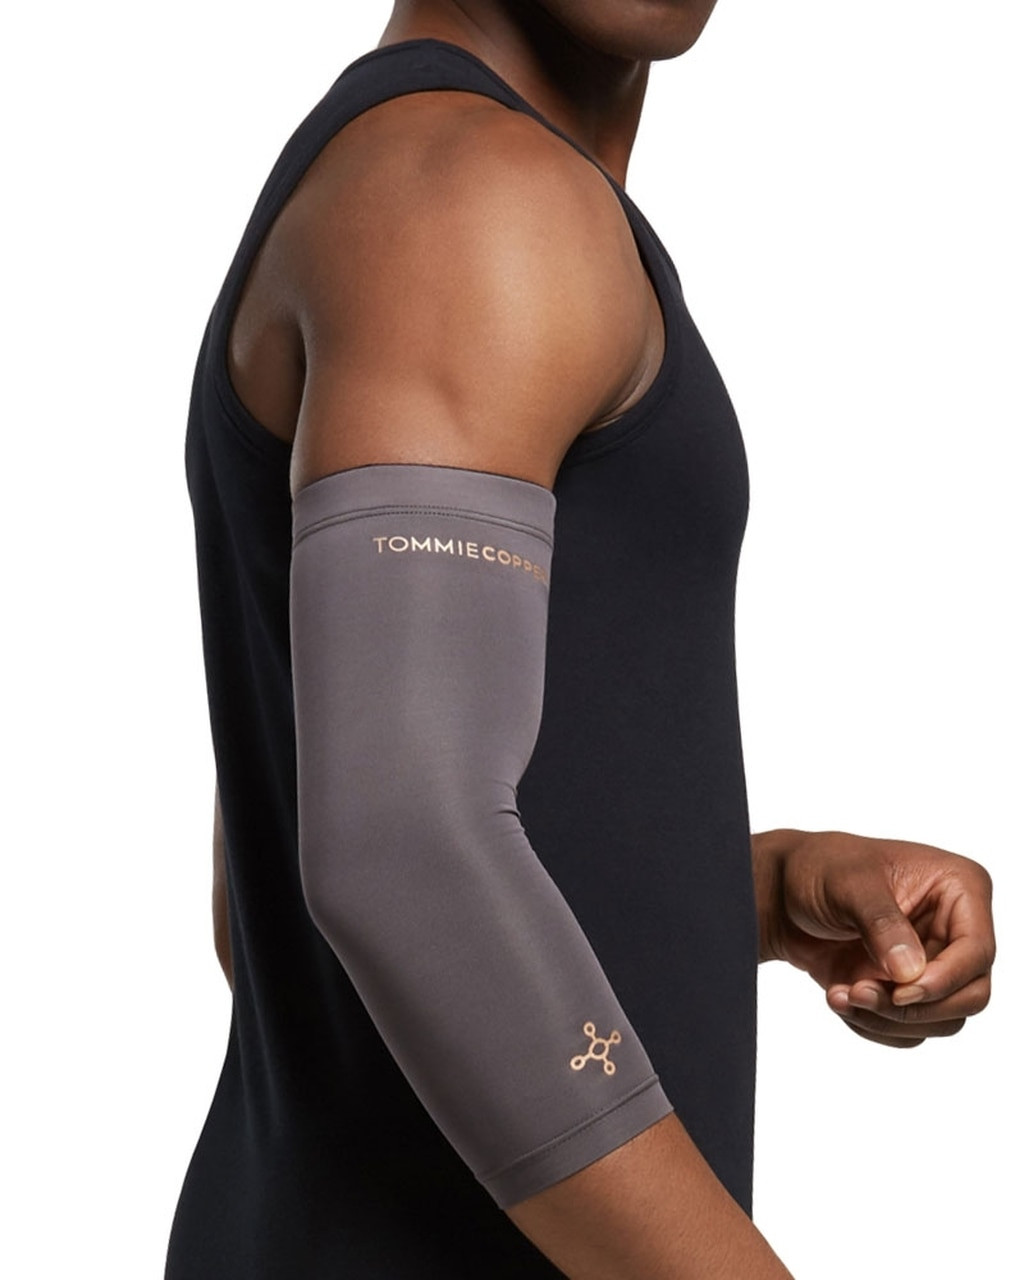 Copper Compression - Copper Infused Compression Sleeves - Arm & Elbows